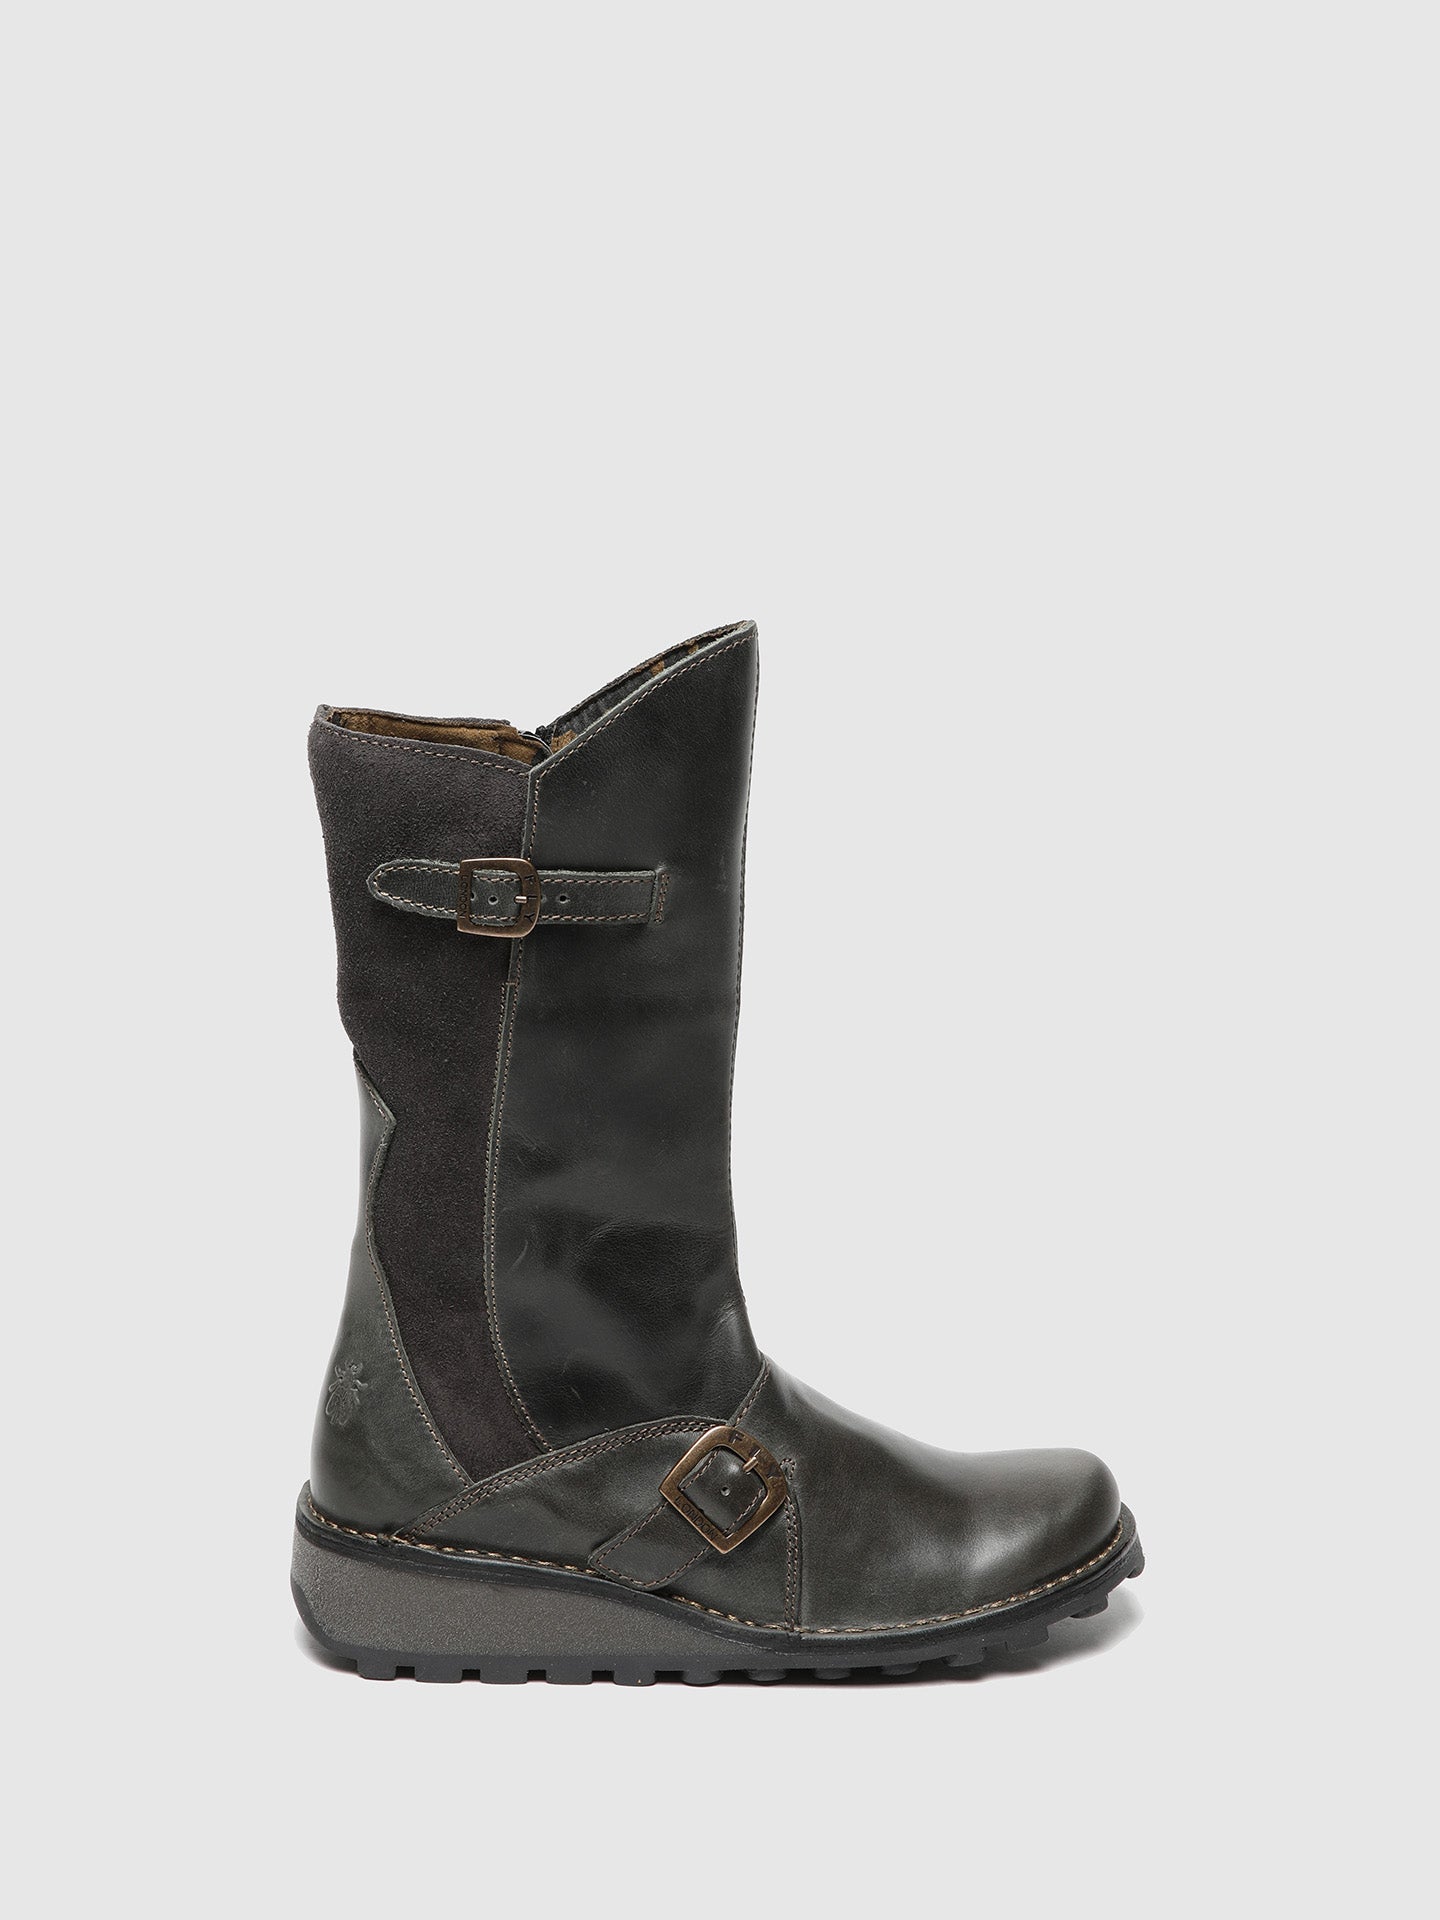 Fly London Gray Buckle Boots